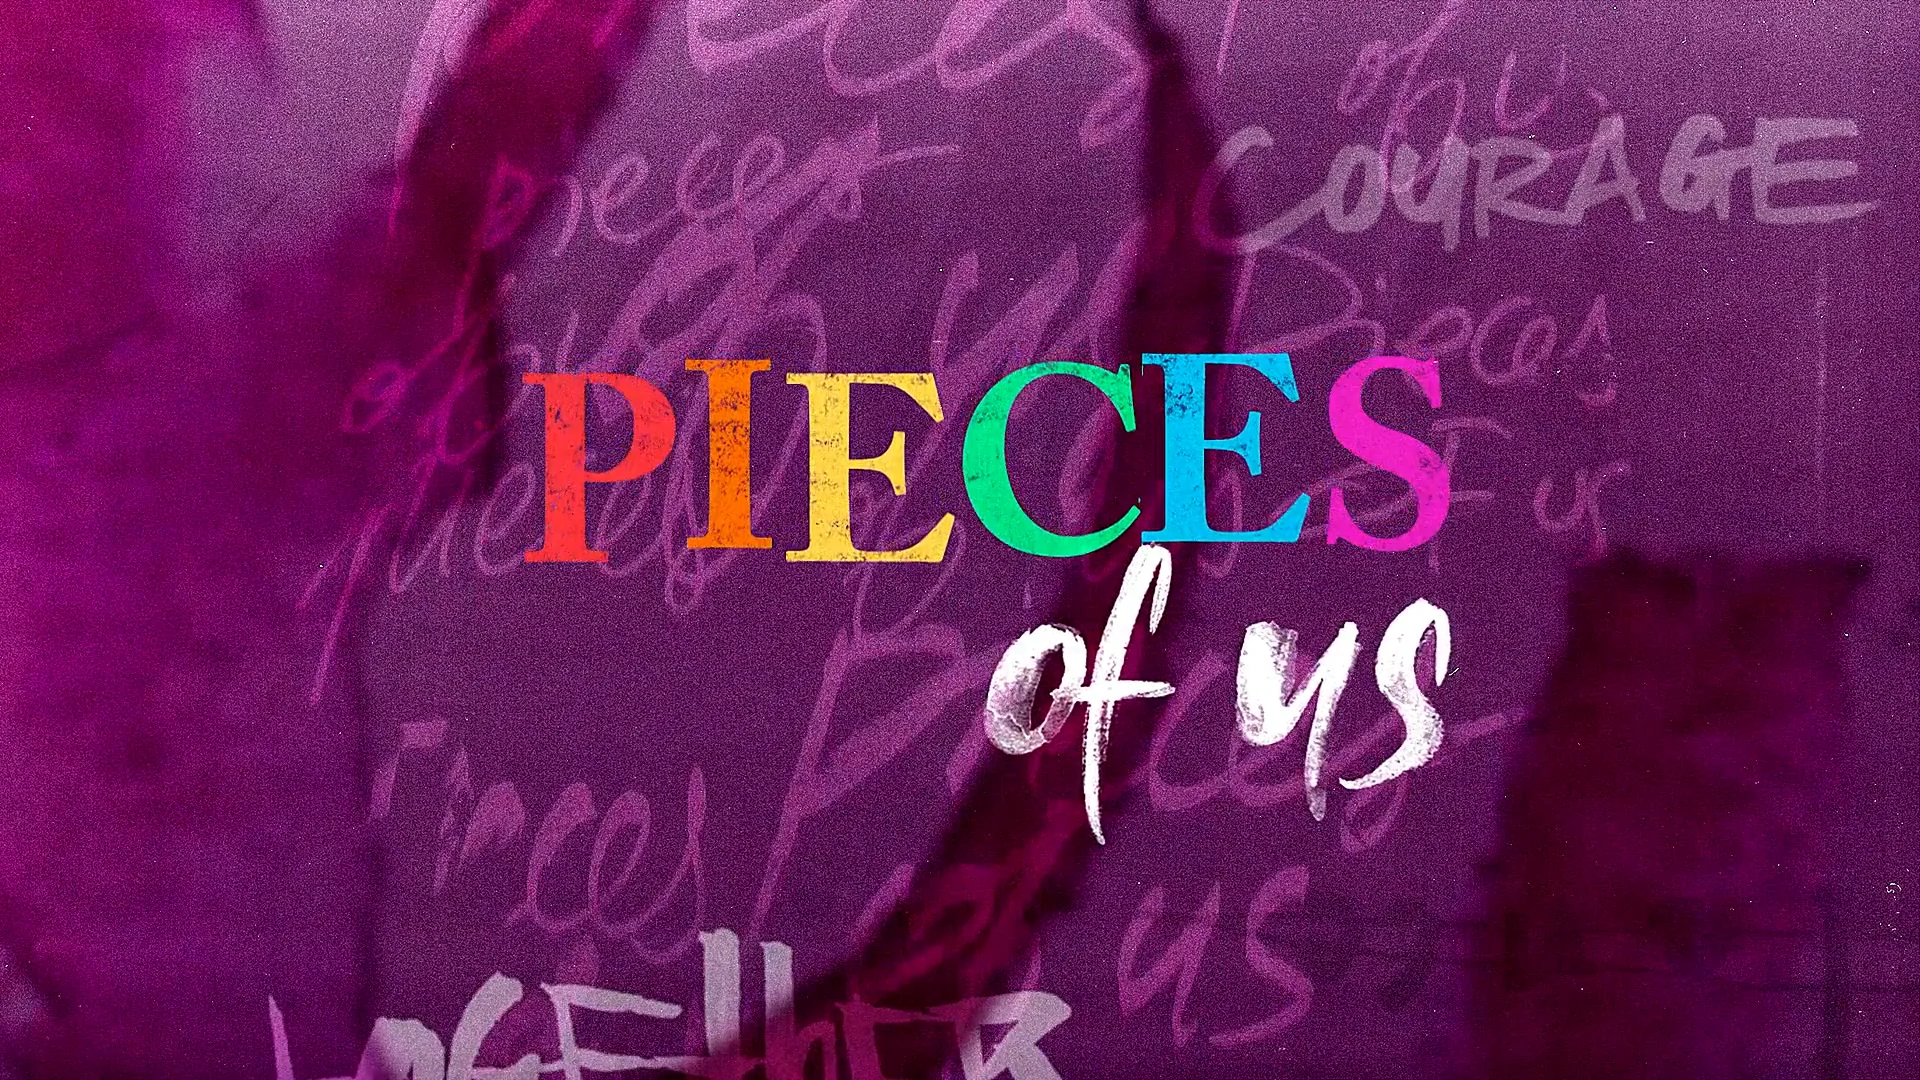 Pieces of Us Trailer 